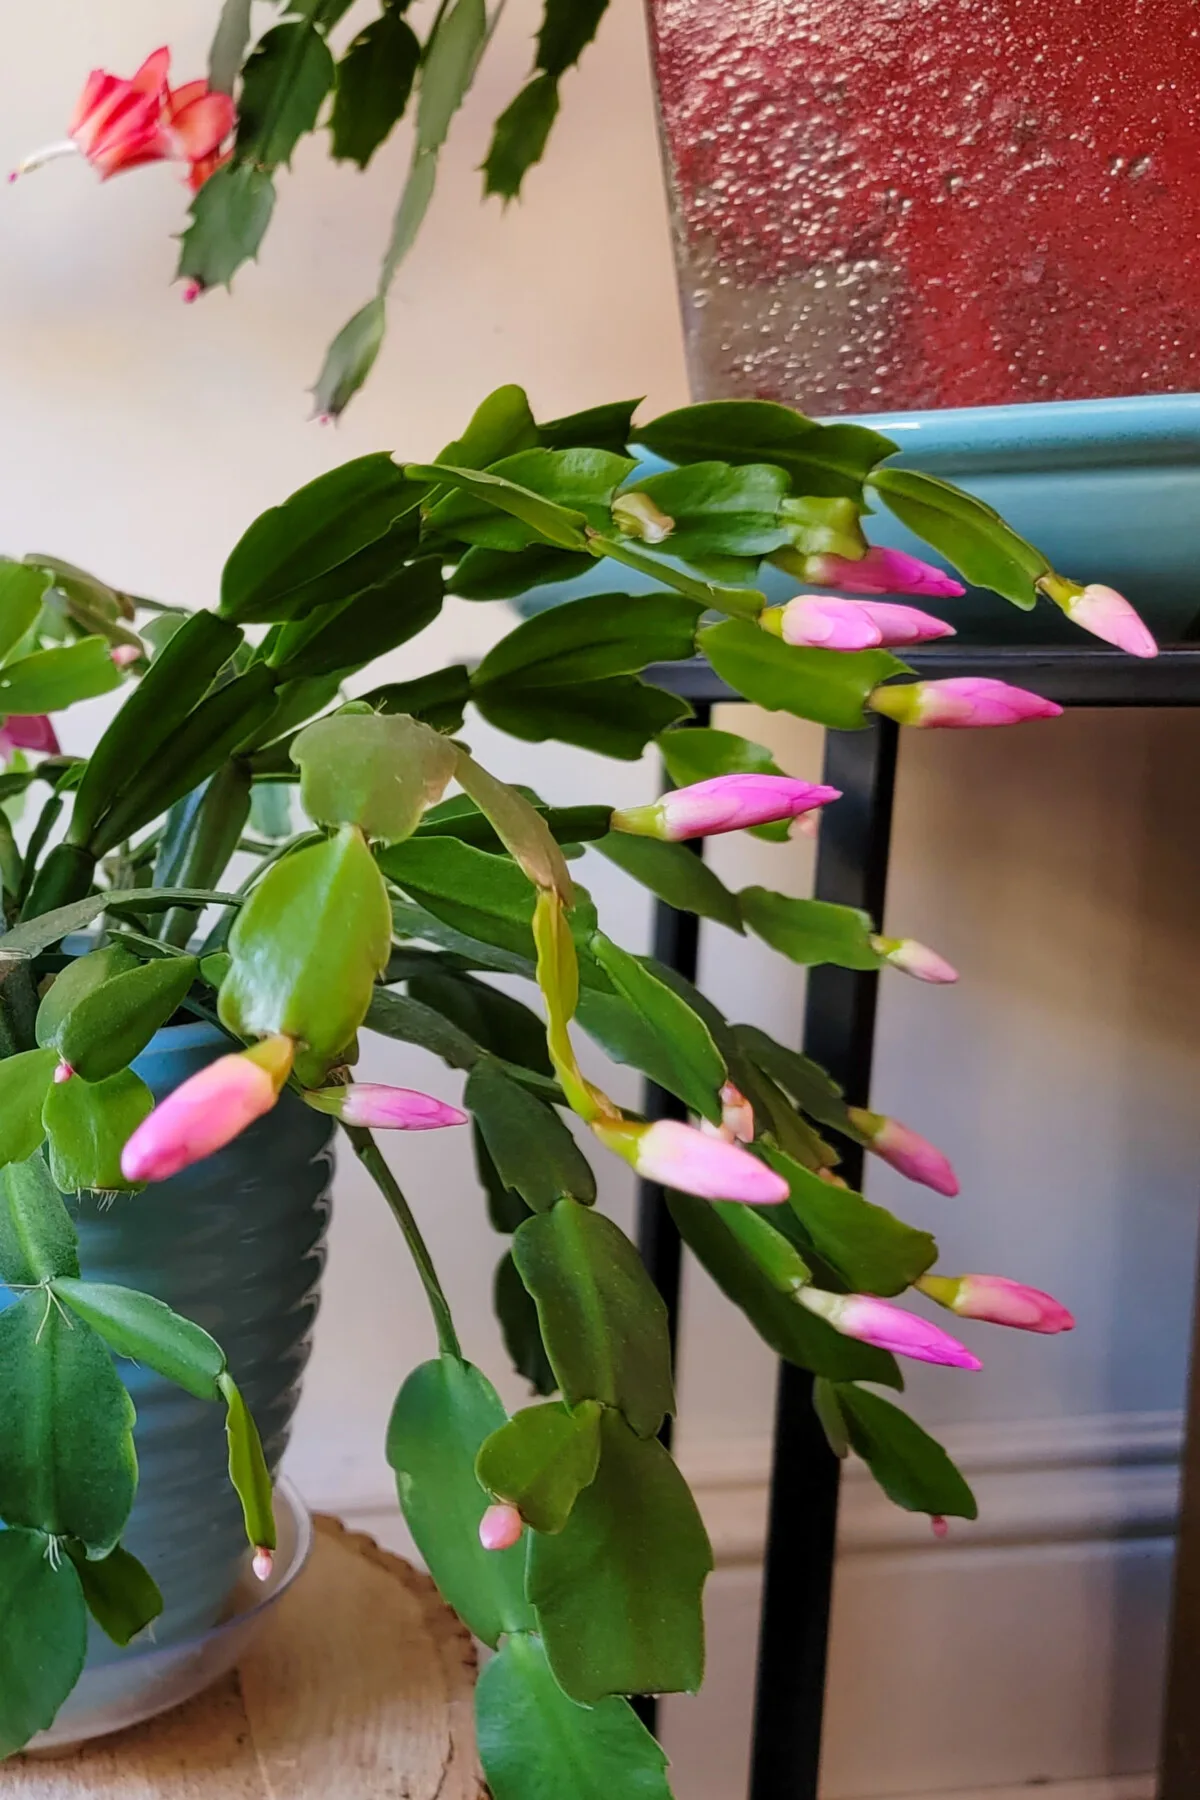 Christmas cactus covered in pink buds